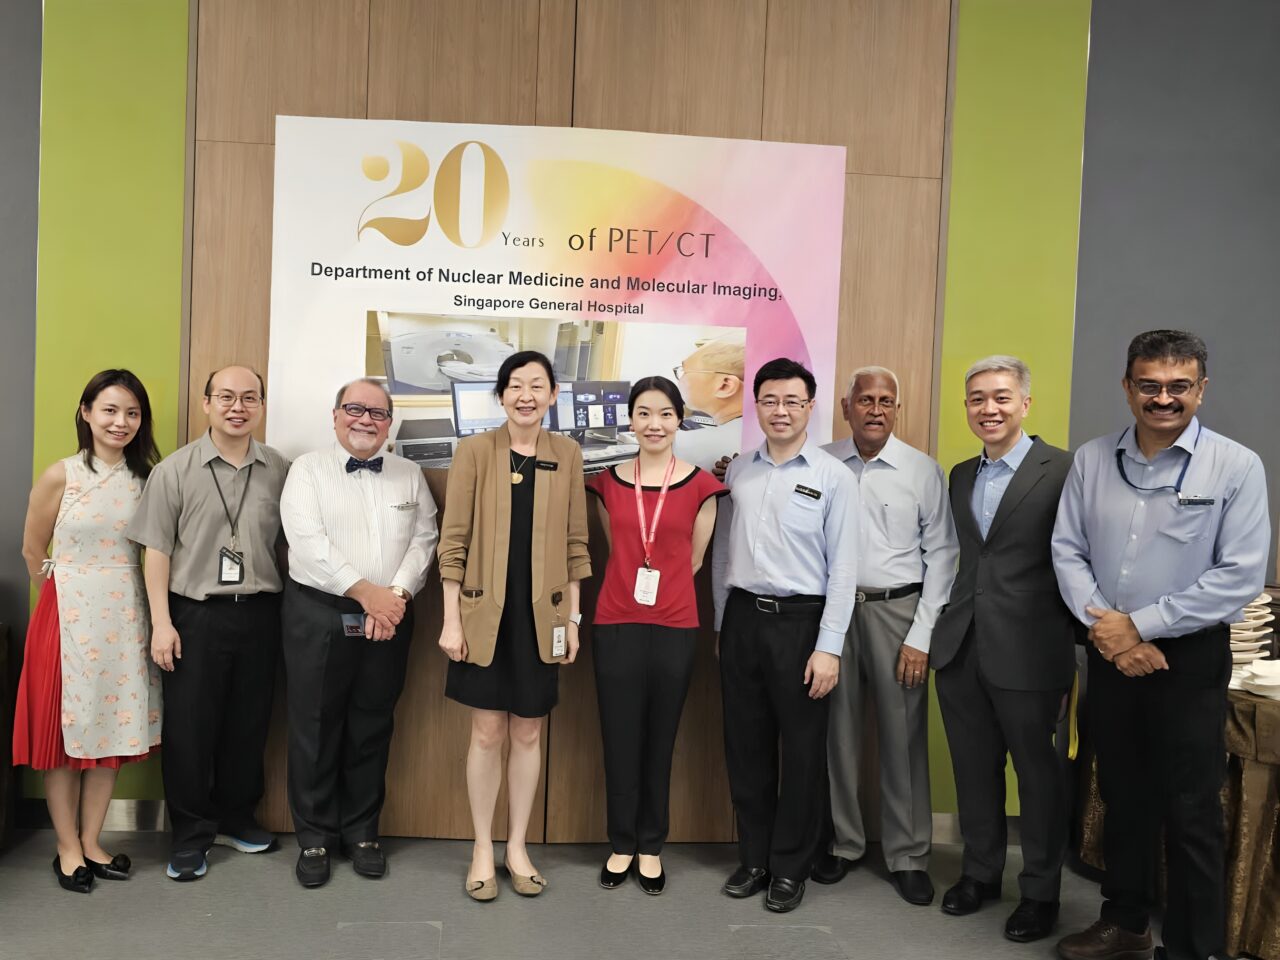 Winnie Lam: Singapore General Hospital Department of Nuclear Medicine and Molecular Imaging celebrated 20 years of PET/CT in SGH